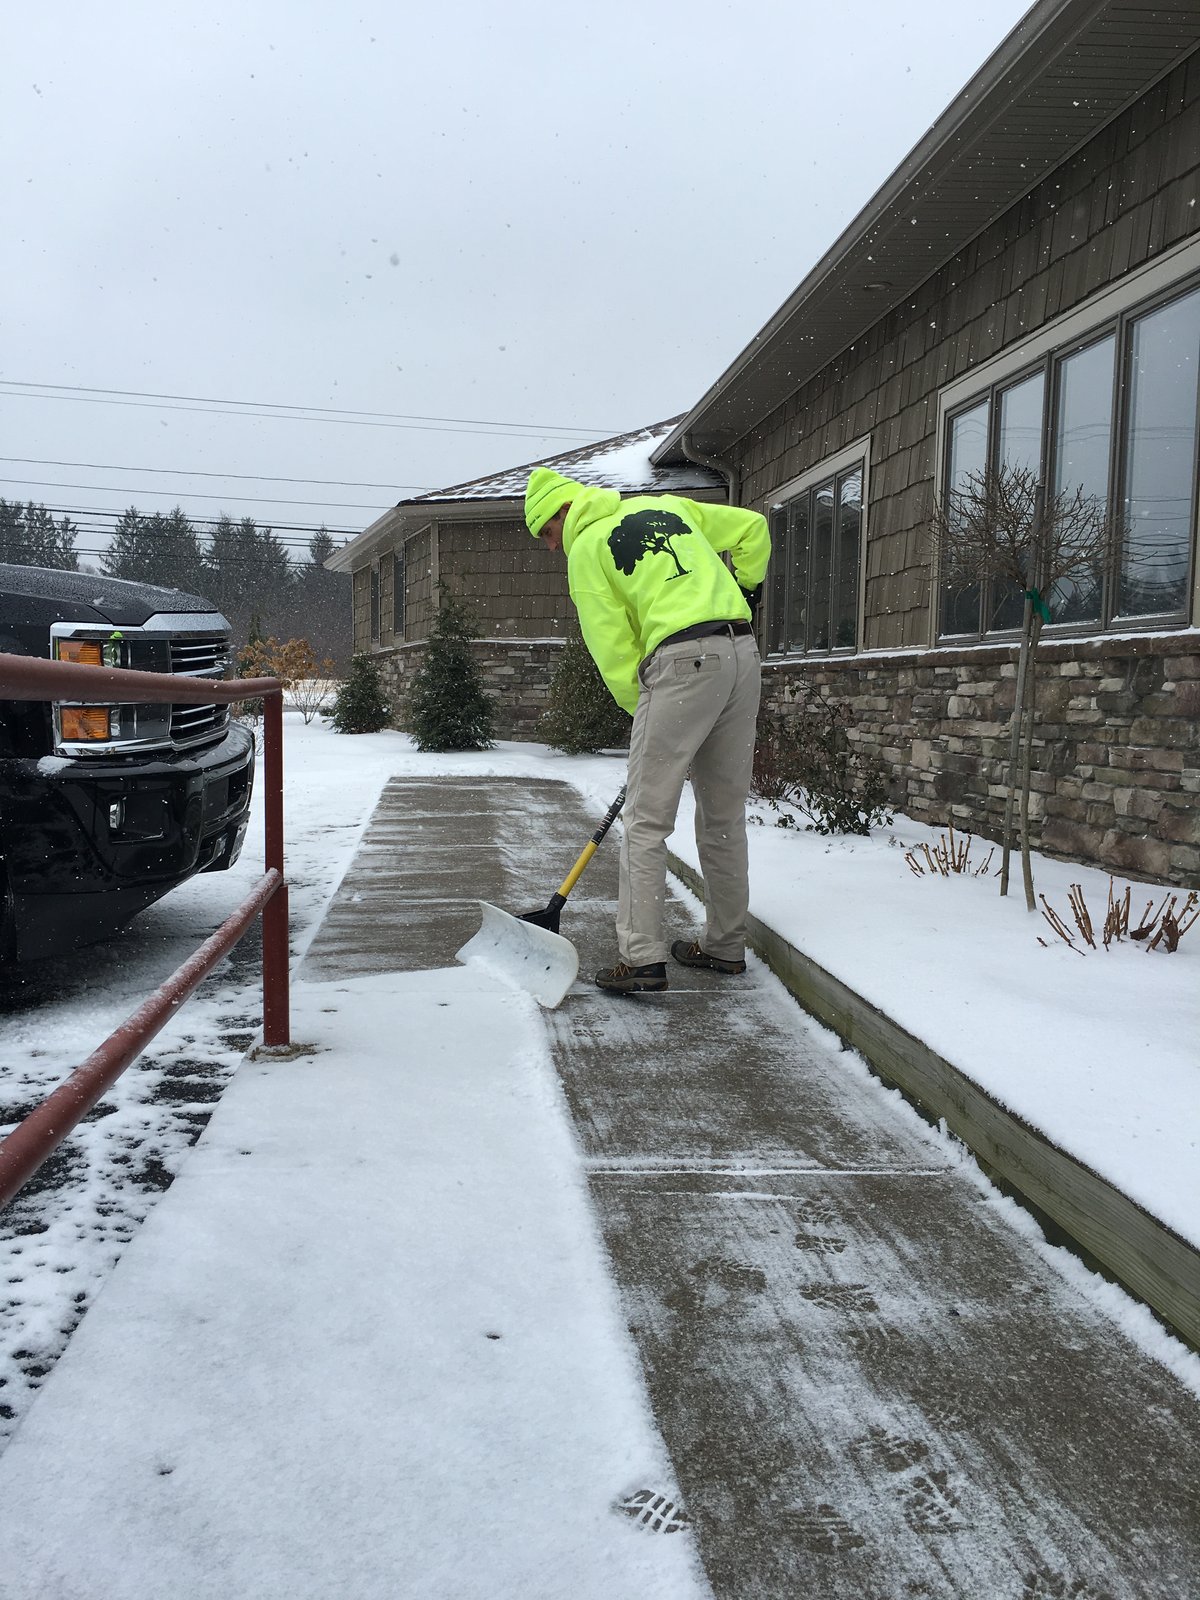 snow removal contractor shoveling snow off sidewalk